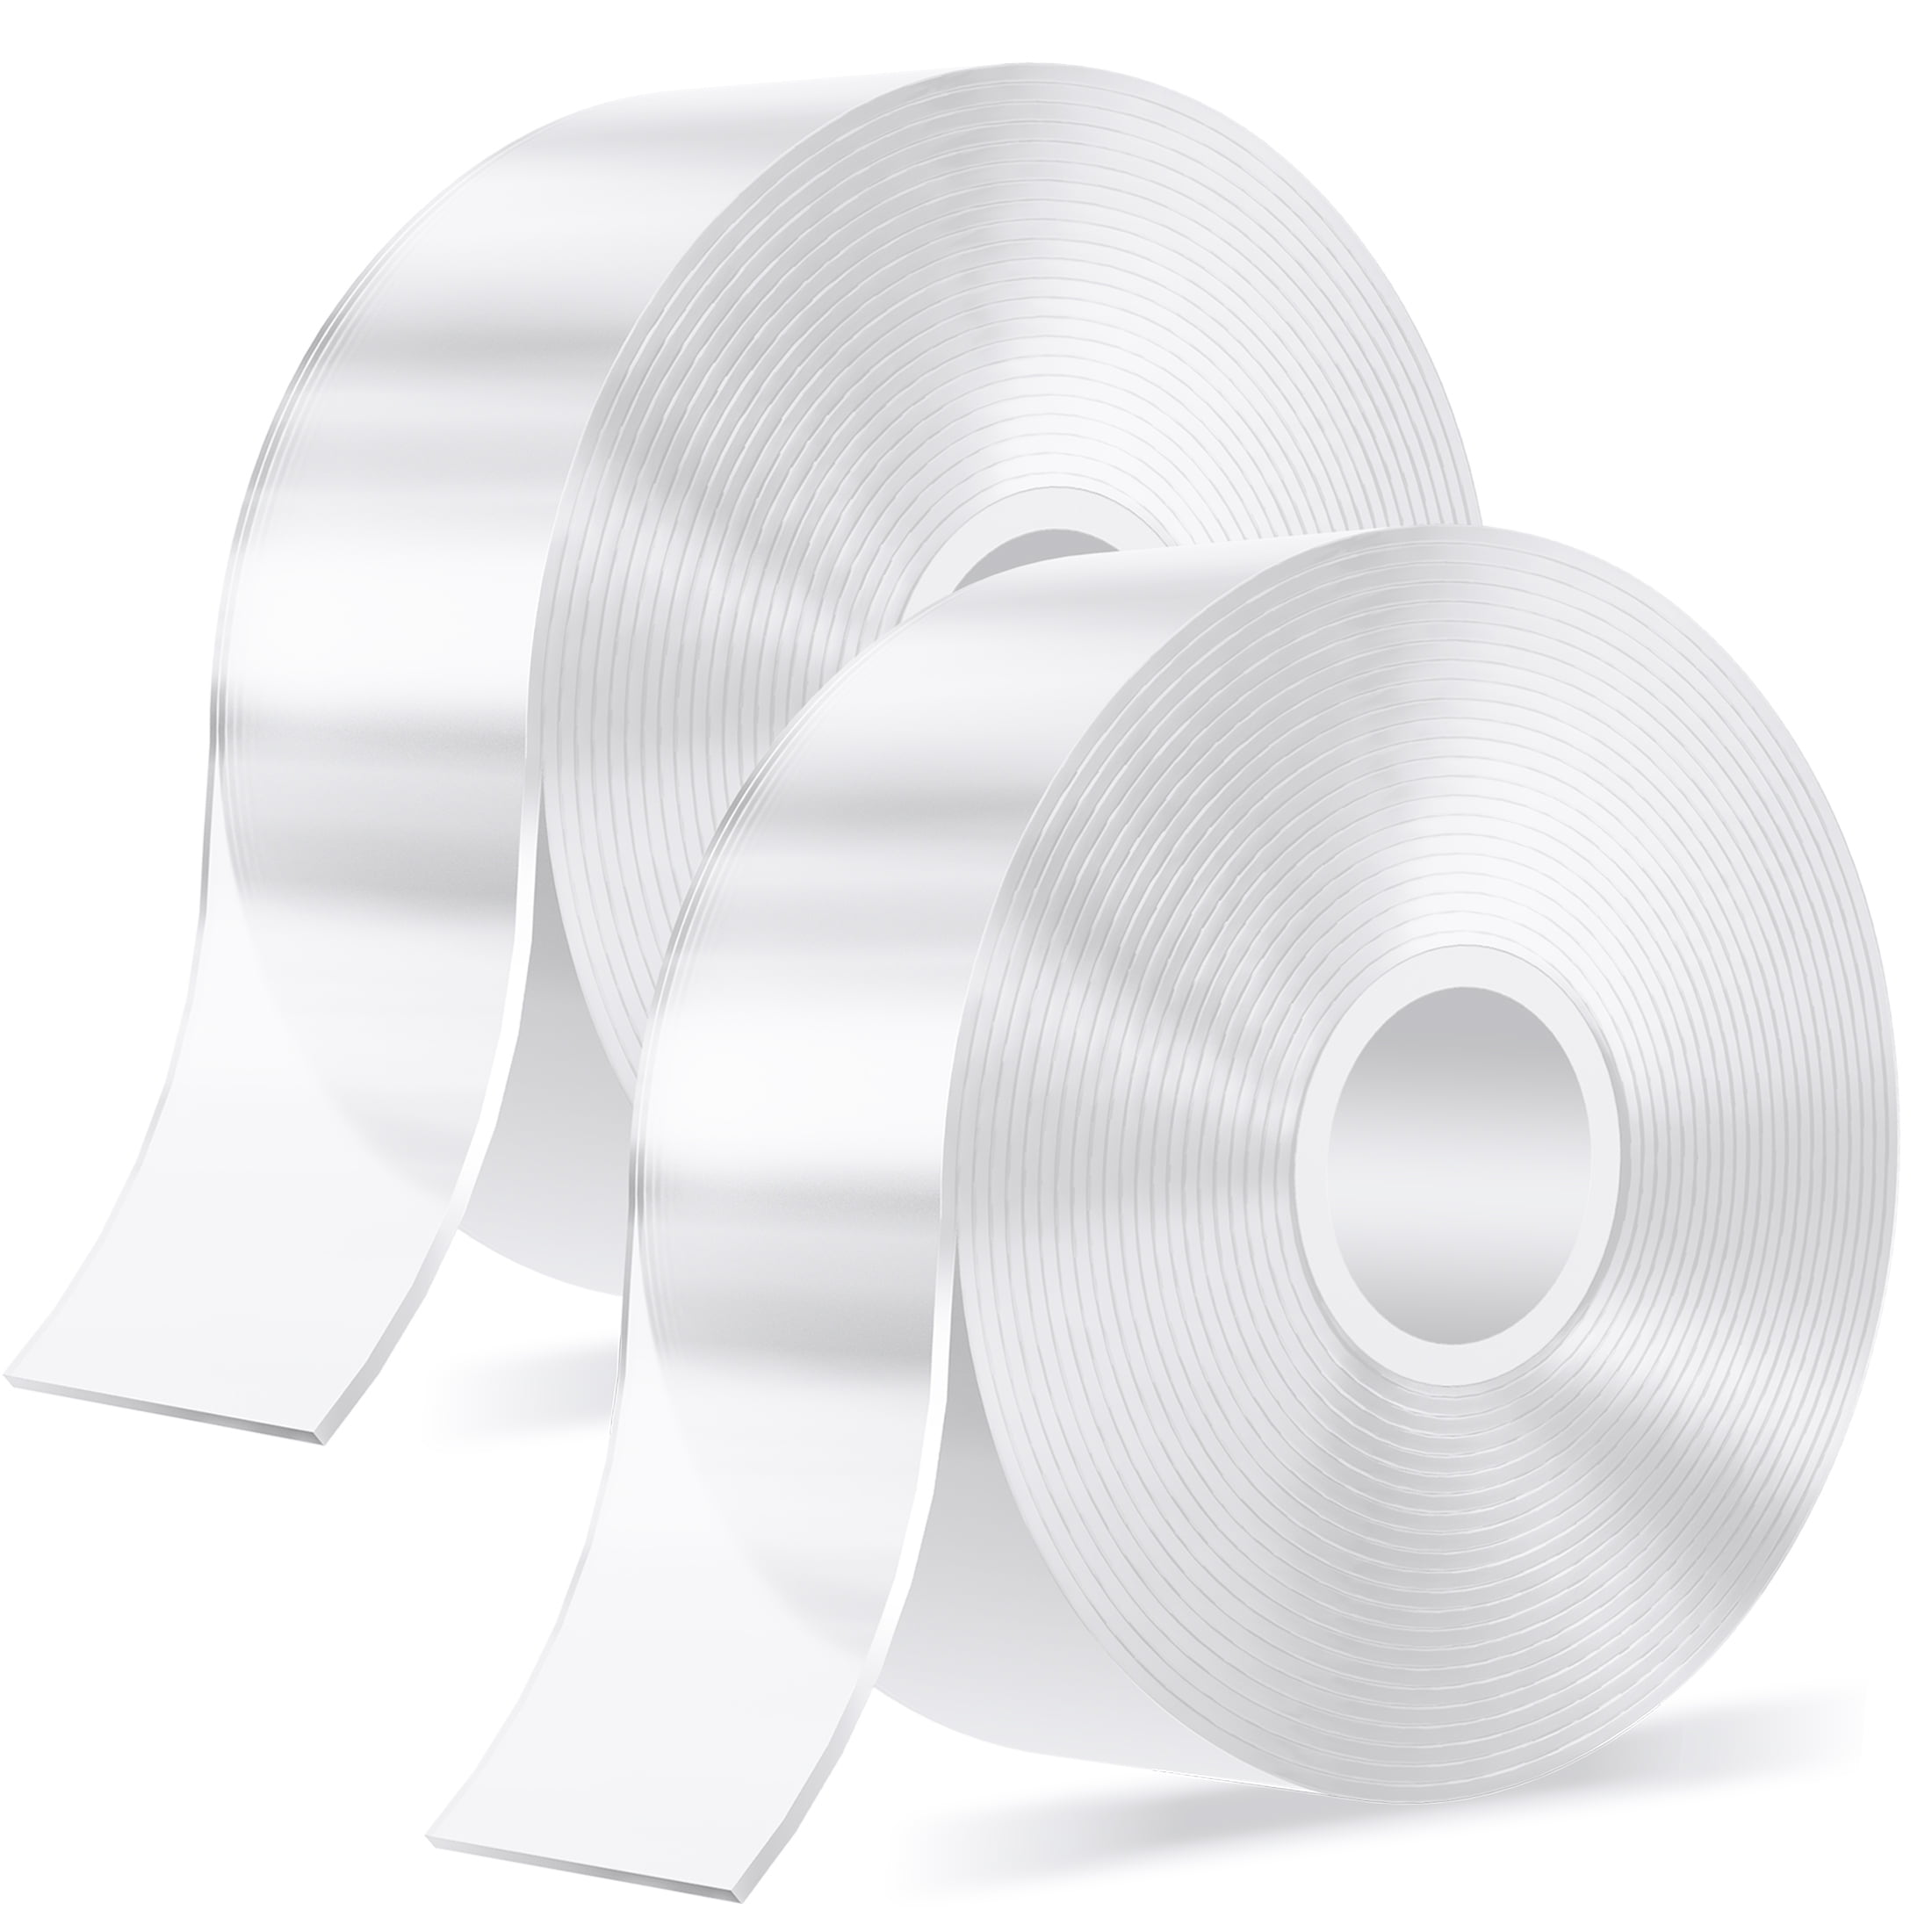 weiseni Double Sided Tape Heavy Duty Nano Strong Mounting Adhesive Tape  Removable Wall Tape Sticky Poster Tape Decor Carpet Tape(9.85FTx1.18in)